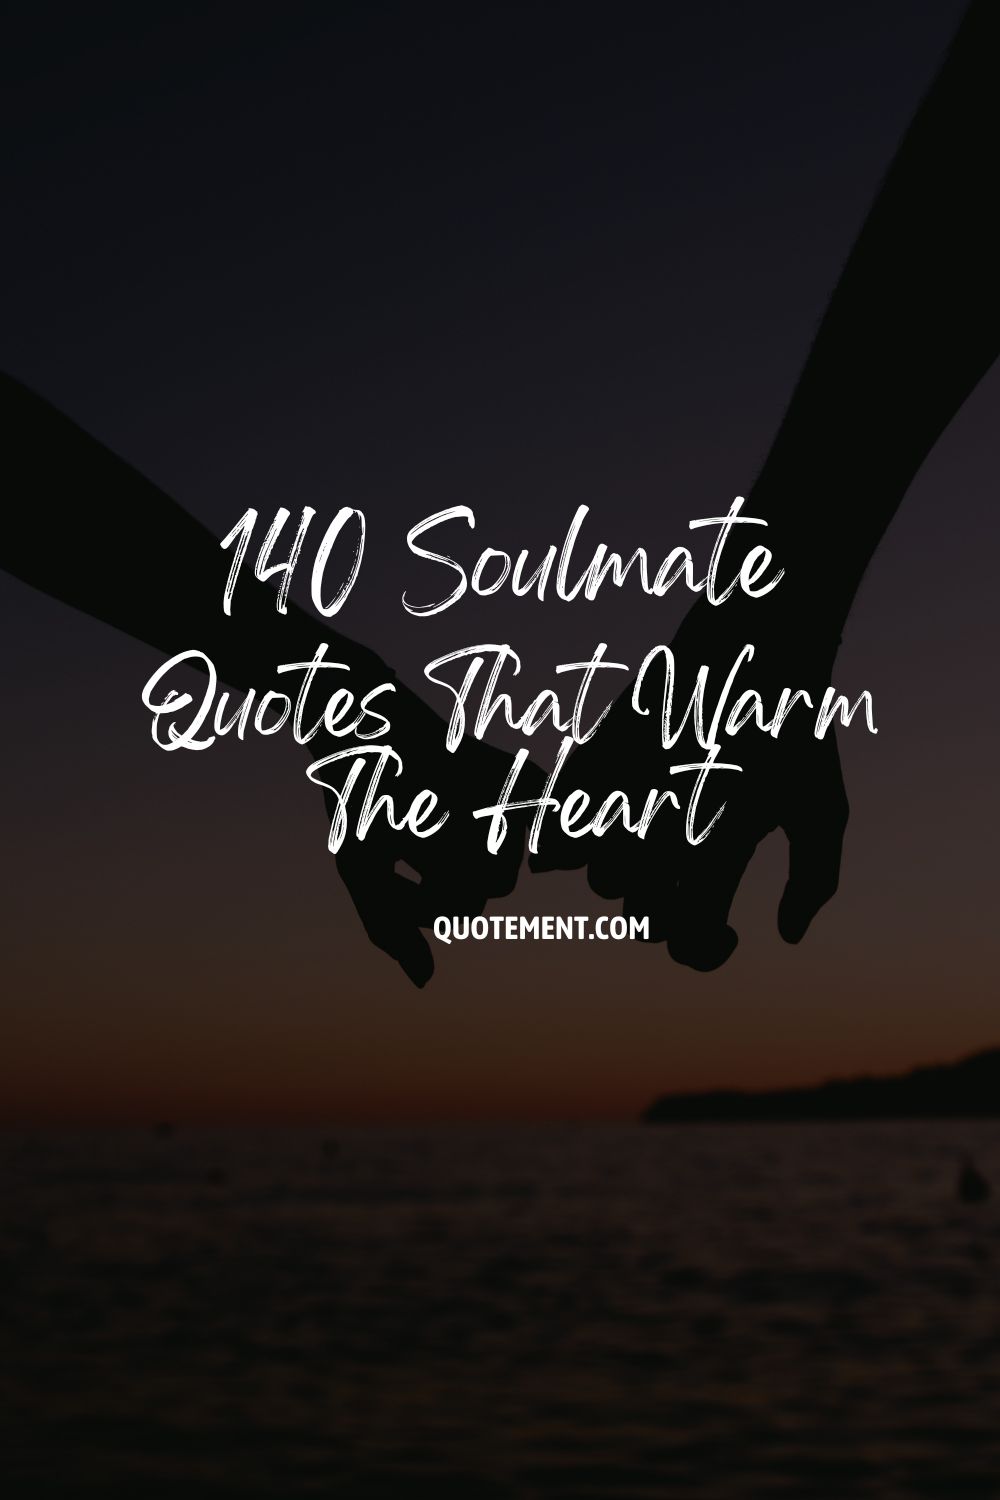 140 Soulmate Quotes Capturing The Essence Of True Love
